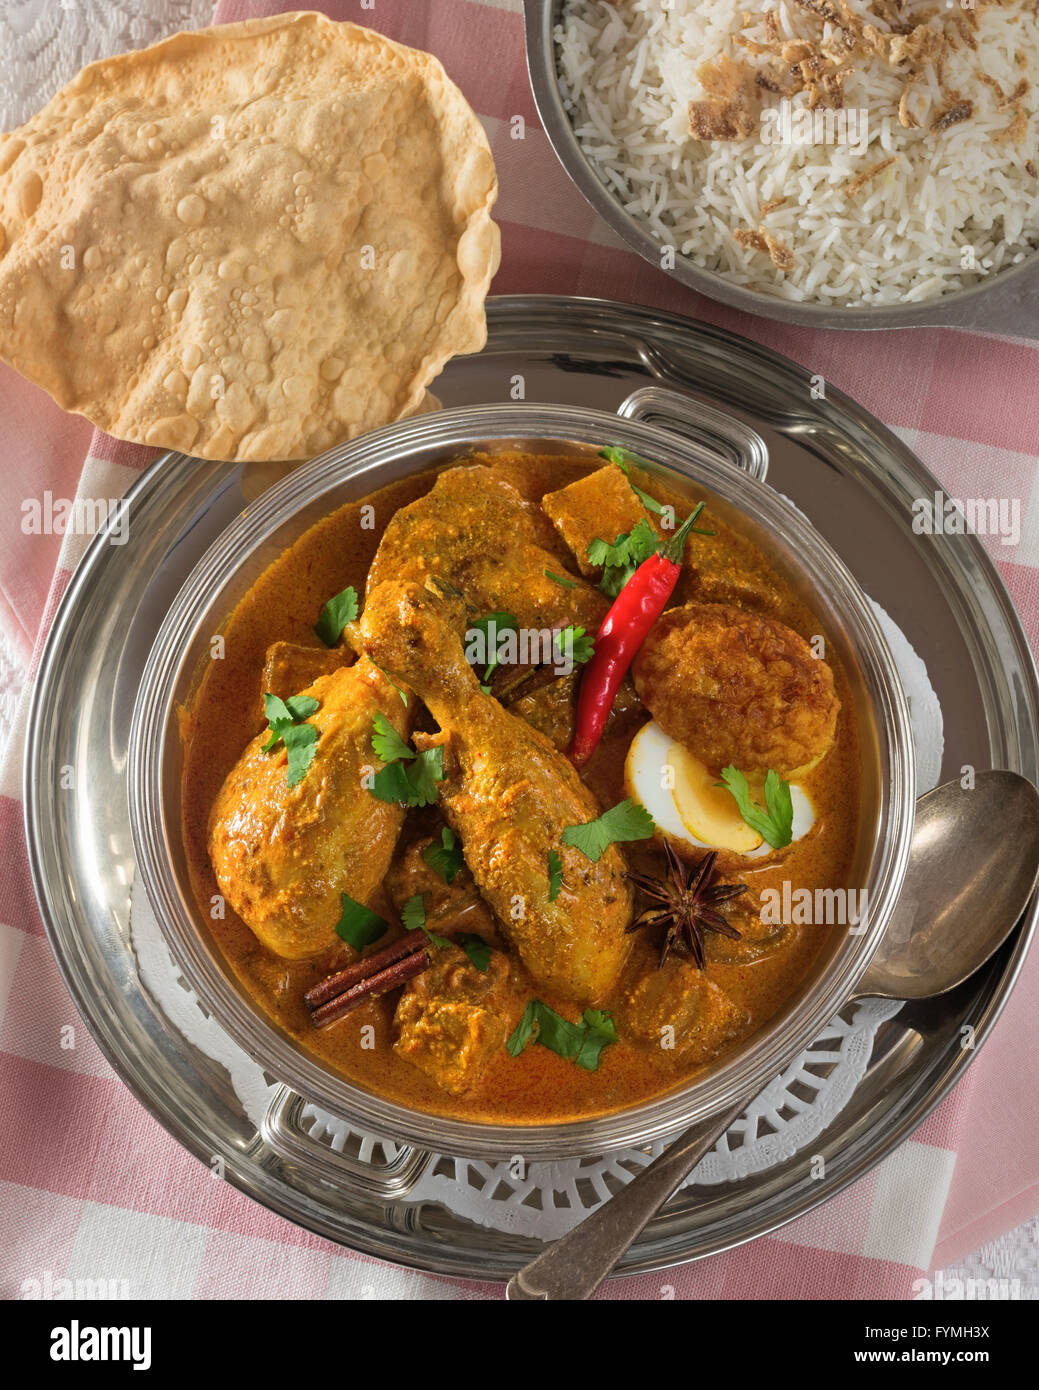 Dak bungalow chicken curry. Anglo Indian food Stock Photo